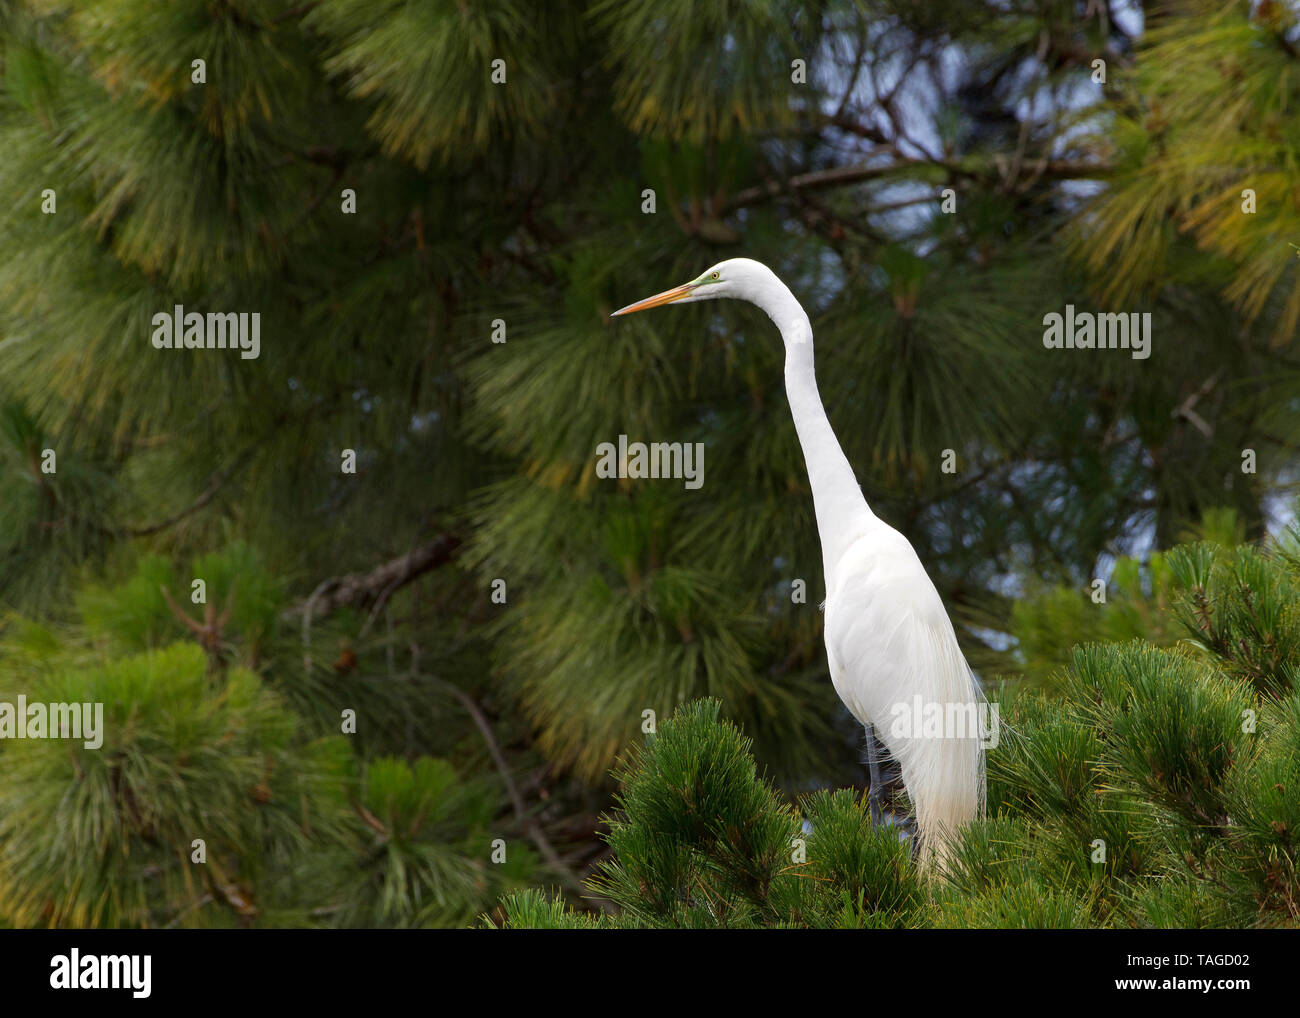 one adult Great Egret, also know as the common egret, perched in a Ponderosa Pine tree looking to viewers left with copy space. Stock Photo